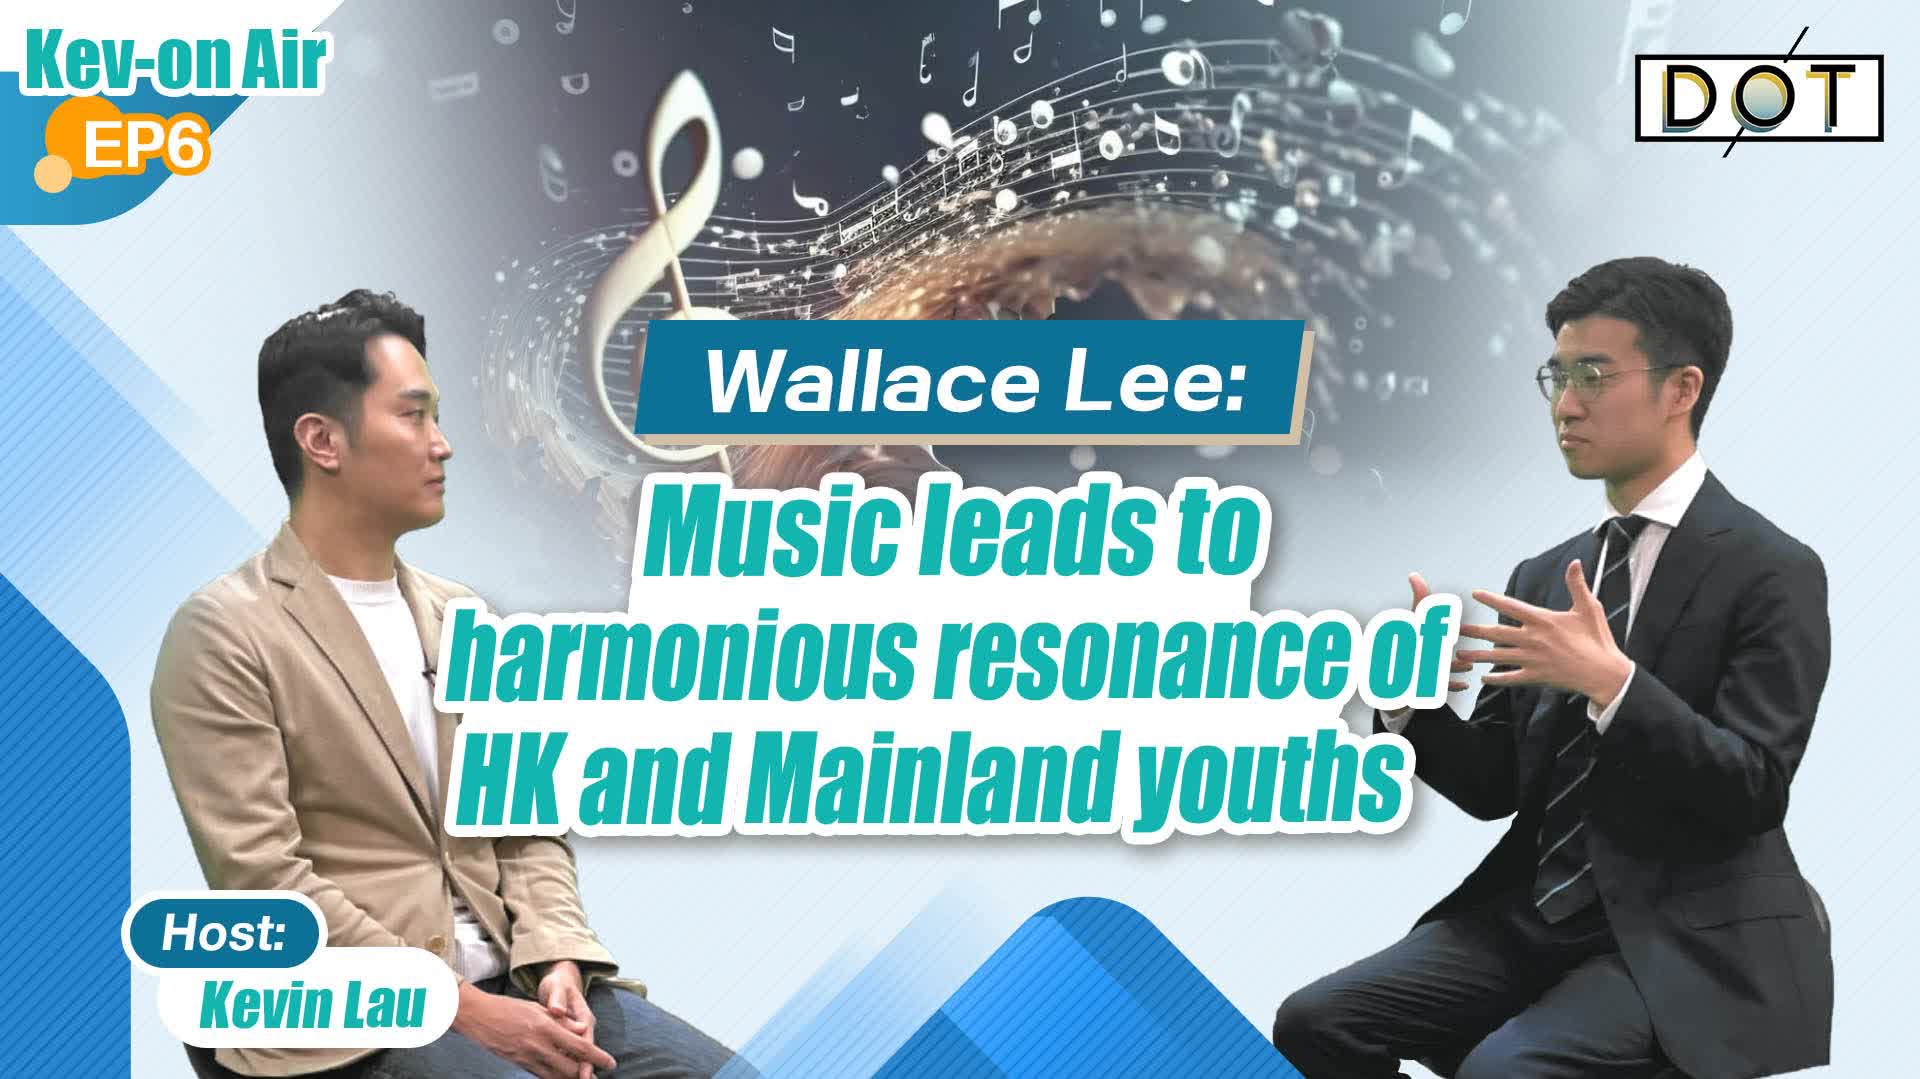 Kev-On Air EP6 | Wallace Lee: Music leads to harmonious resonance of HK and Mainland youths